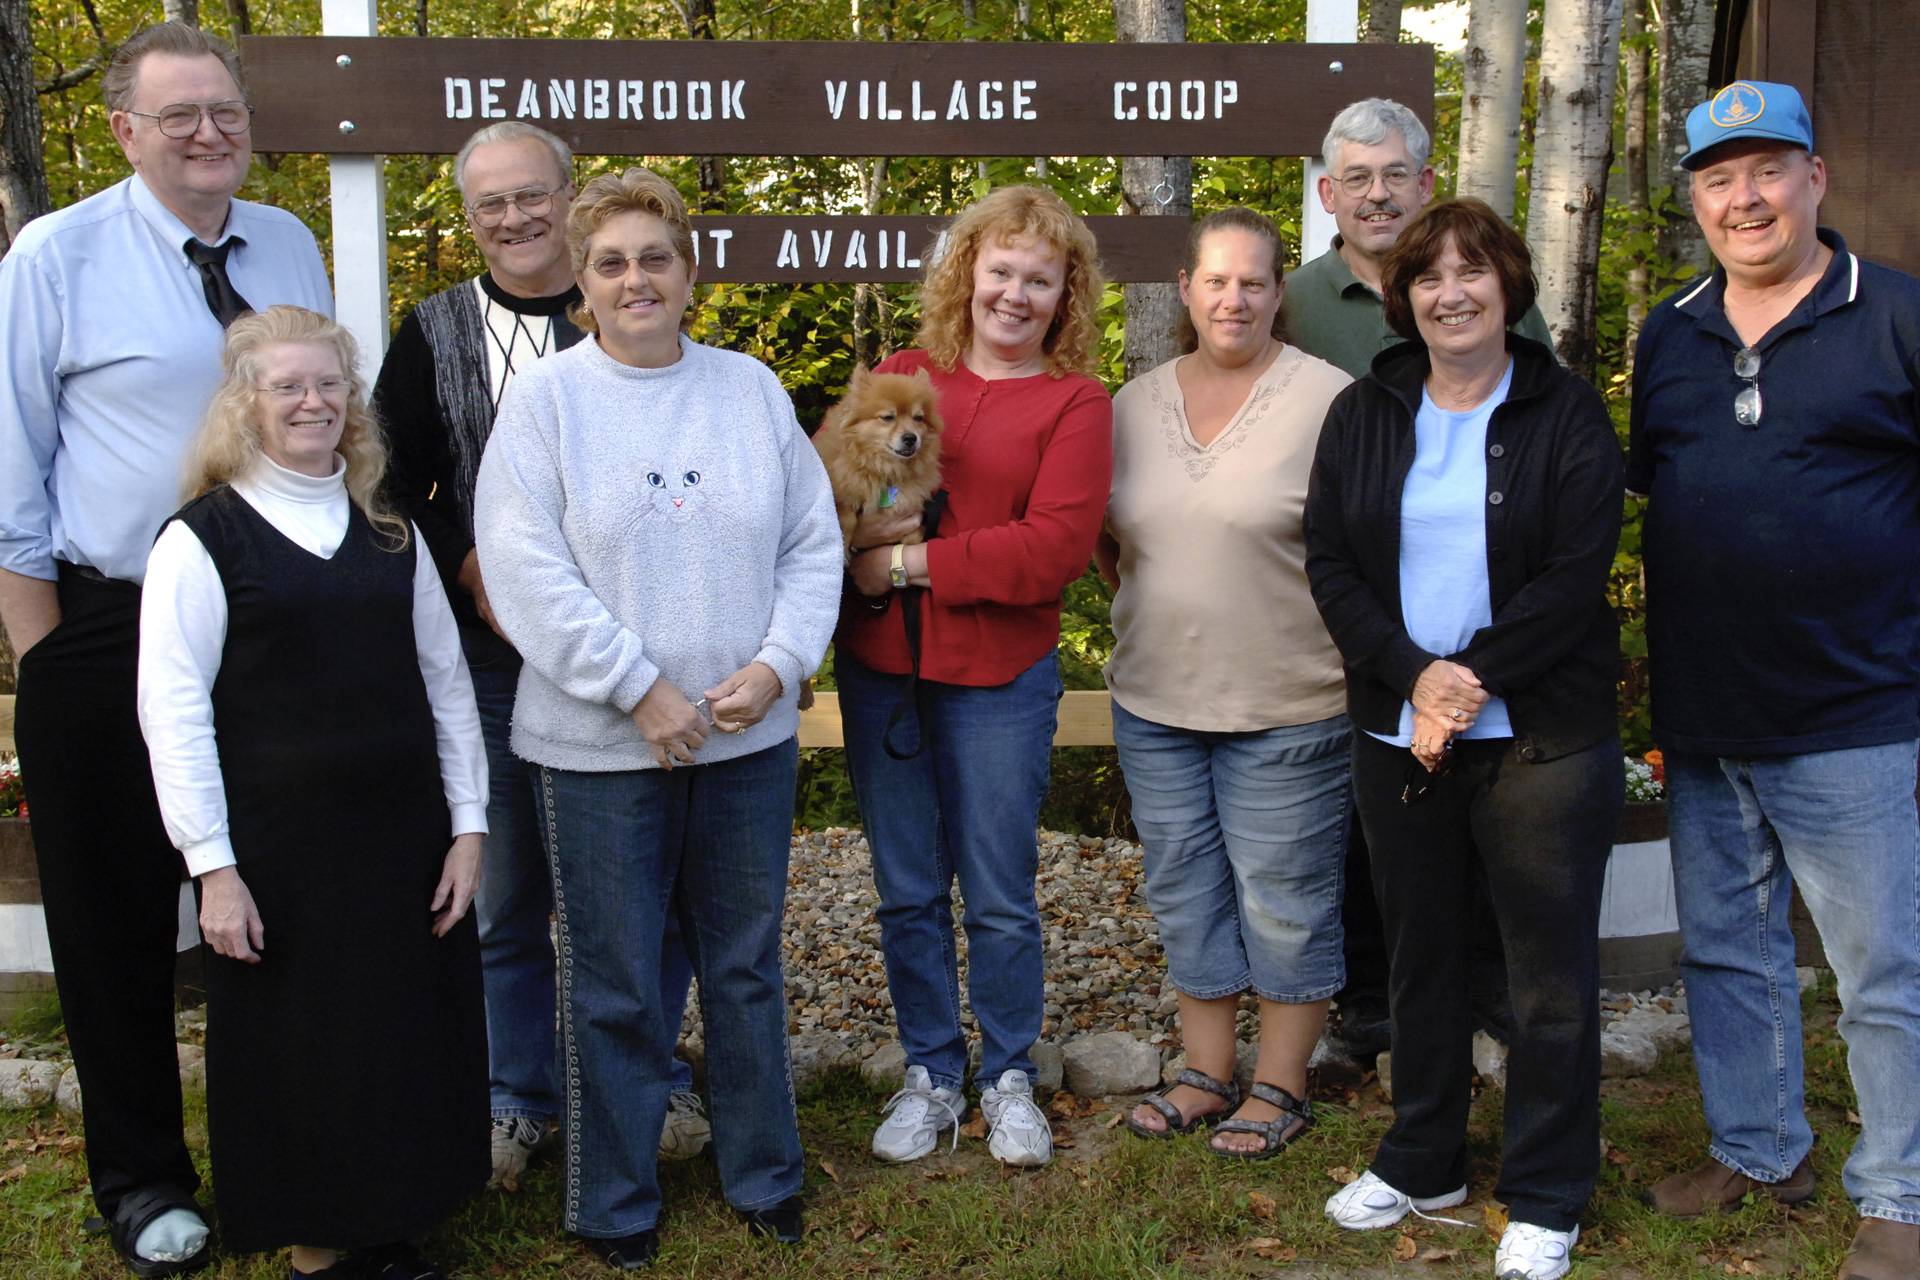 A group of adults stand in front of a sign that reads Deanbrook Village Coop